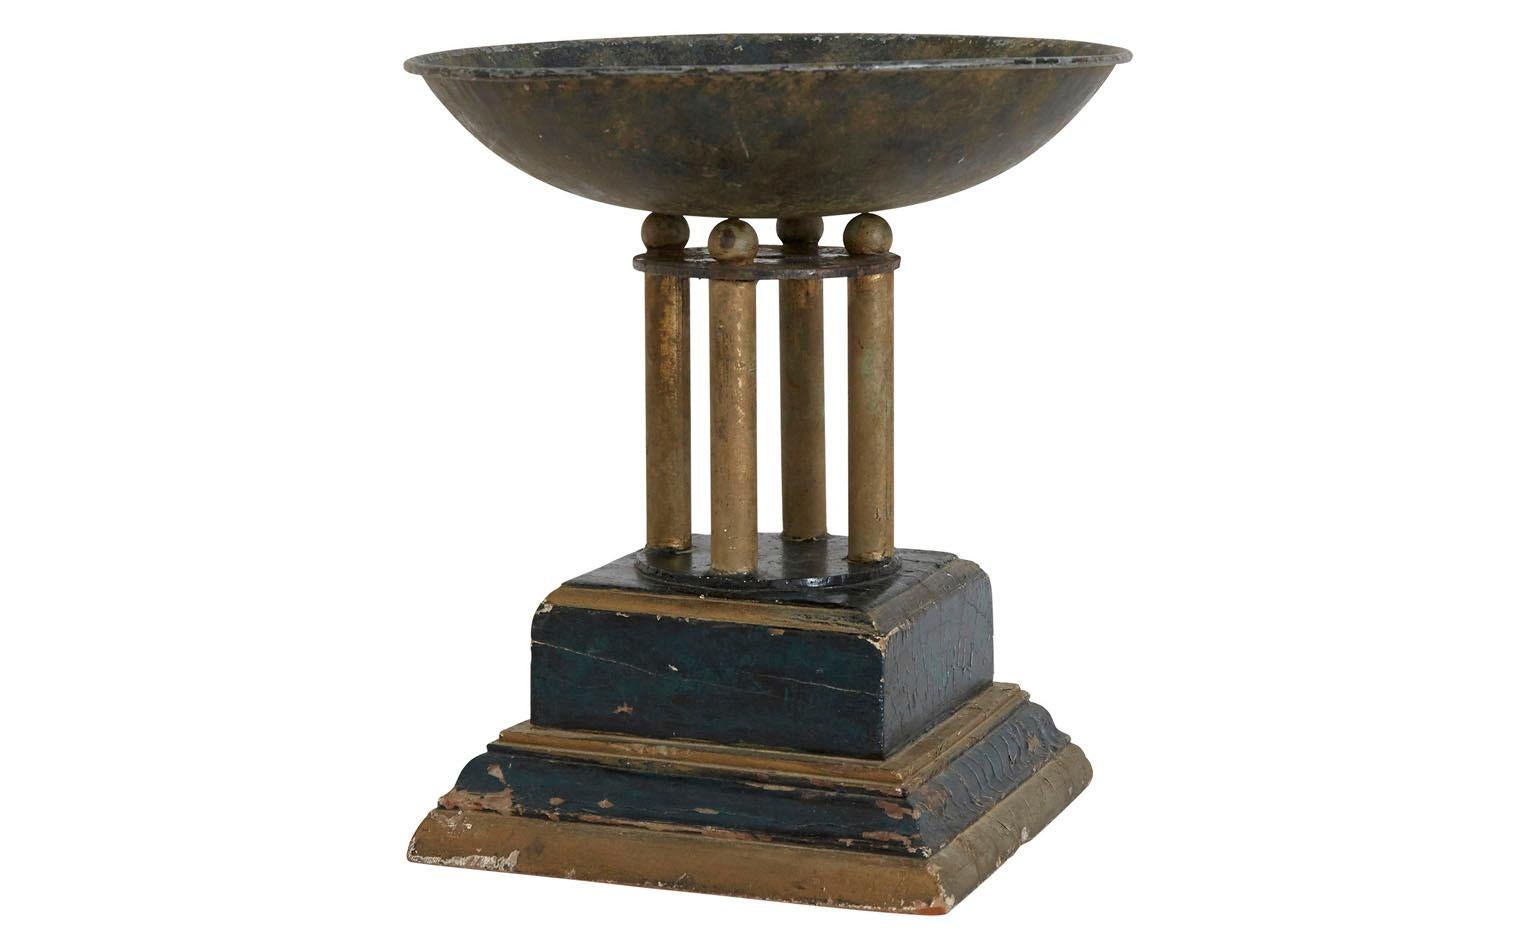 Found in America, our Vintage Pedestal Bowl dates back to the mid-20th century. It features a shallow metal bowl which balances on four matching metal rods and its original, weathered wood-painted base. This curious vessel is in good condition for